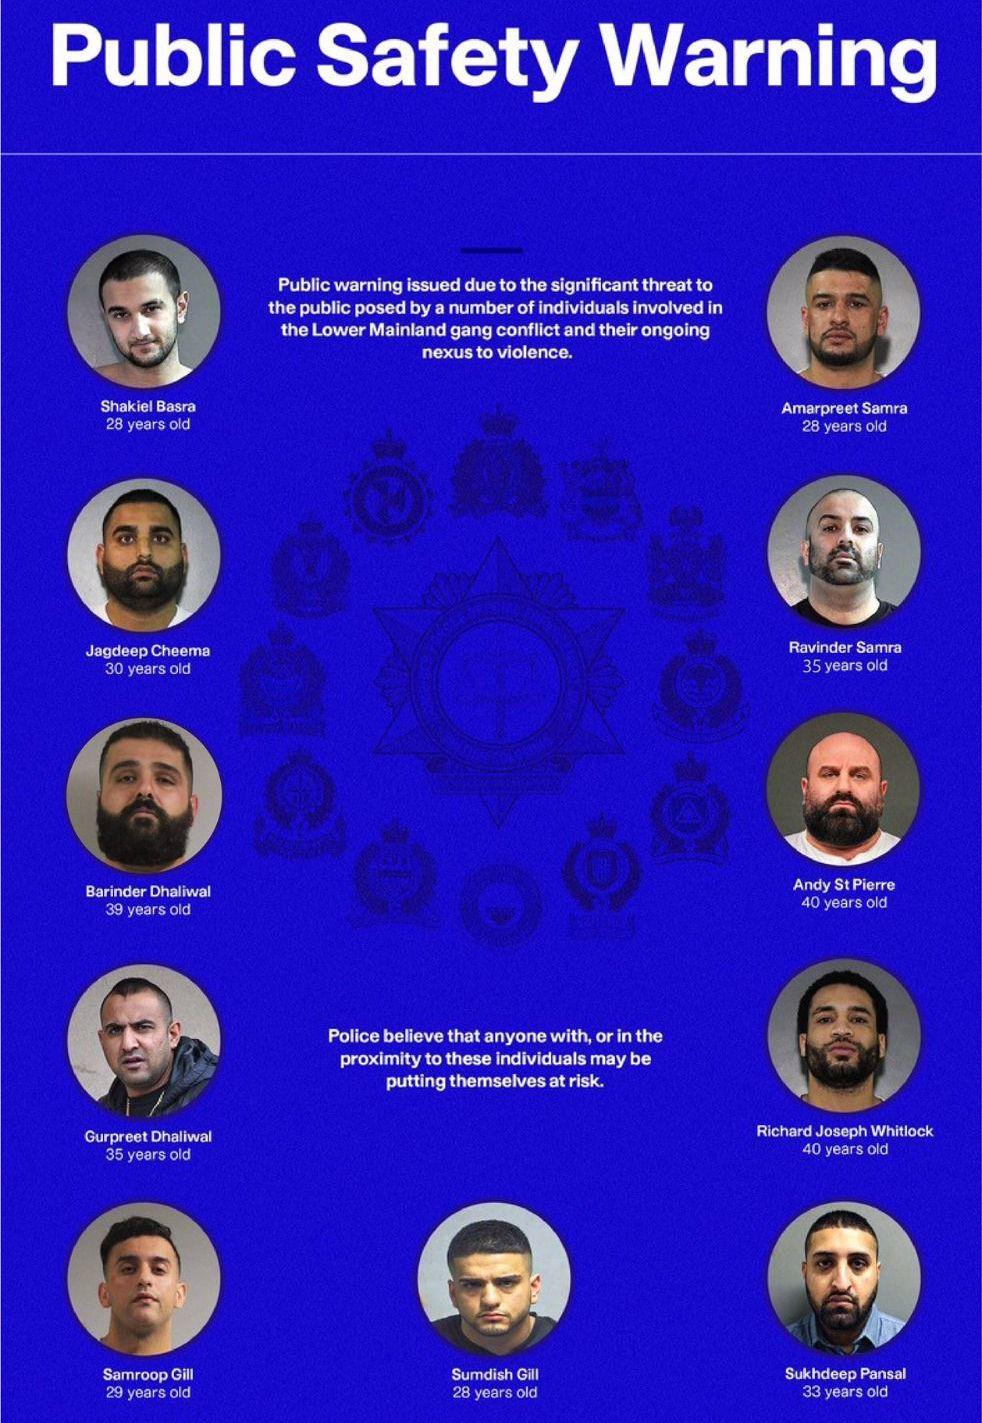 9 Punjabis among 11 gangsters threat to public safety in Canada